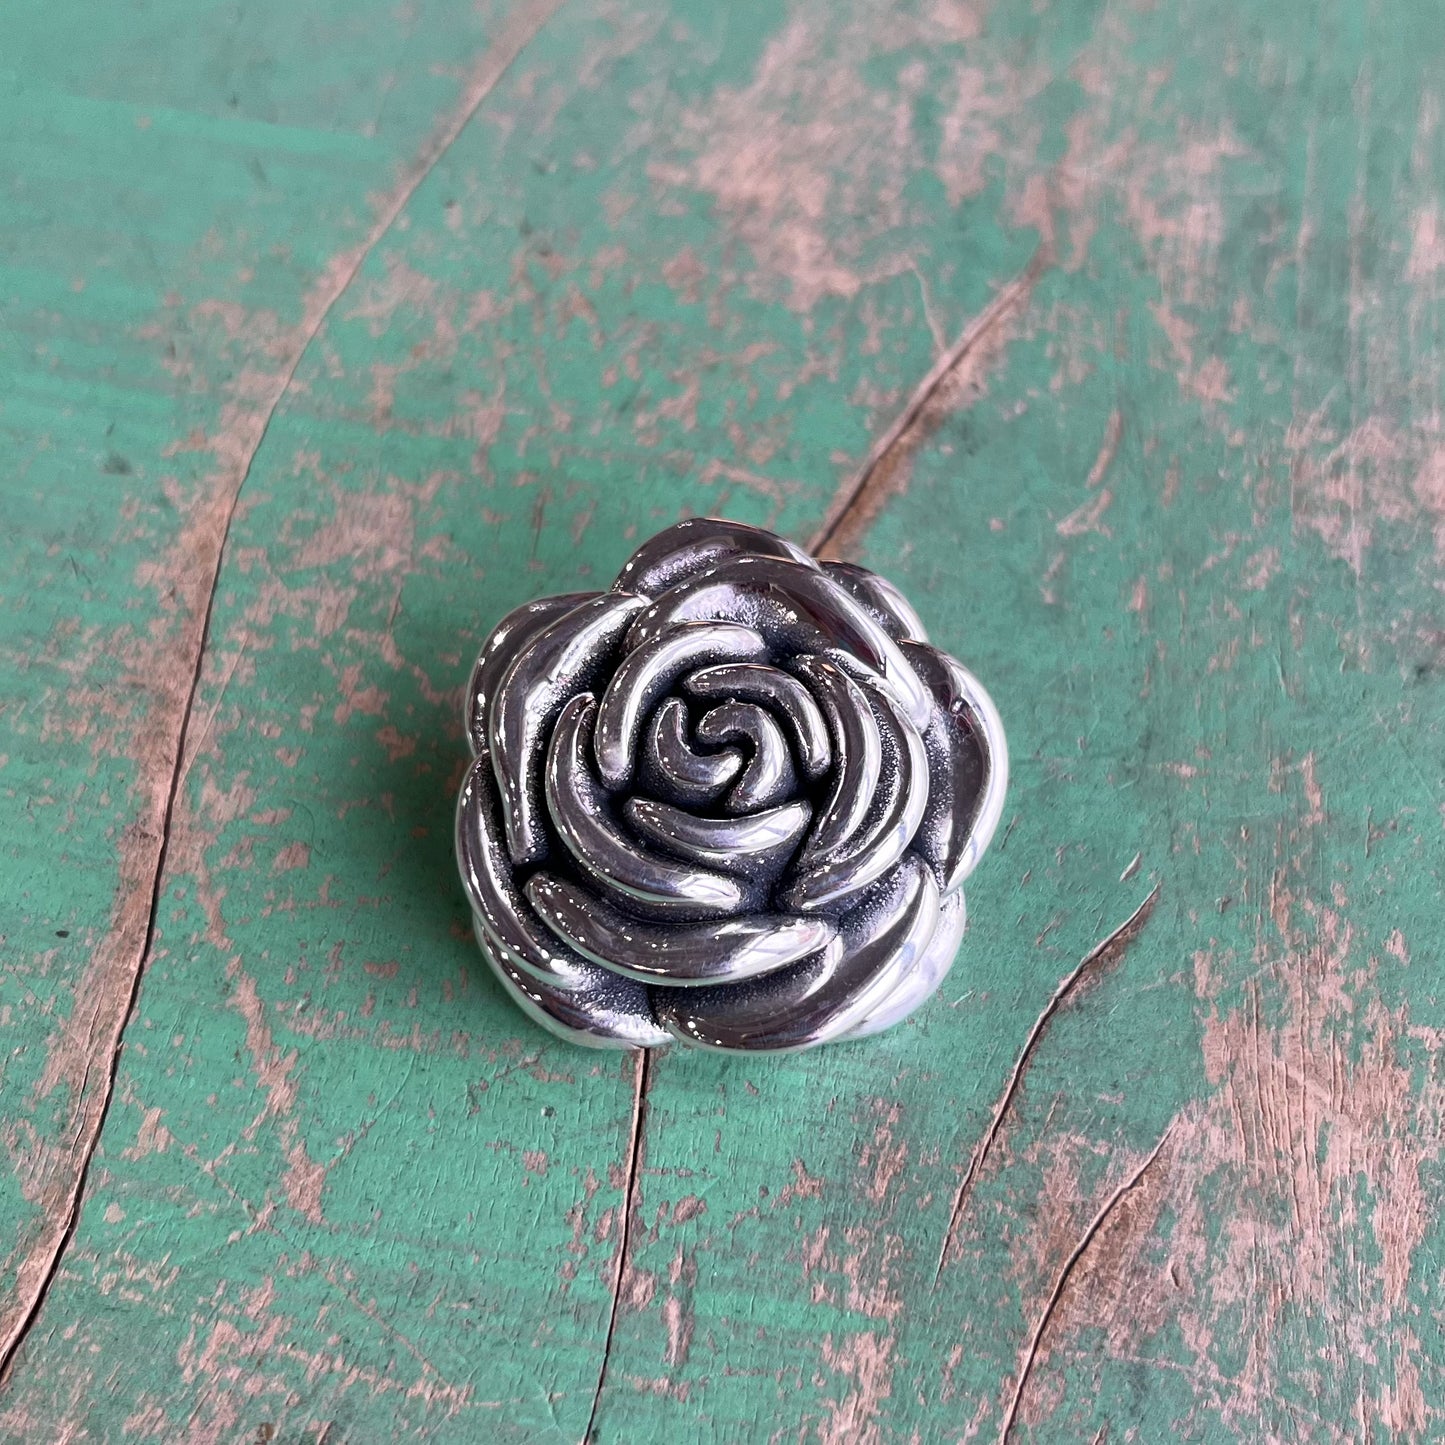 Sterling Silver Rose Pendant Necklace